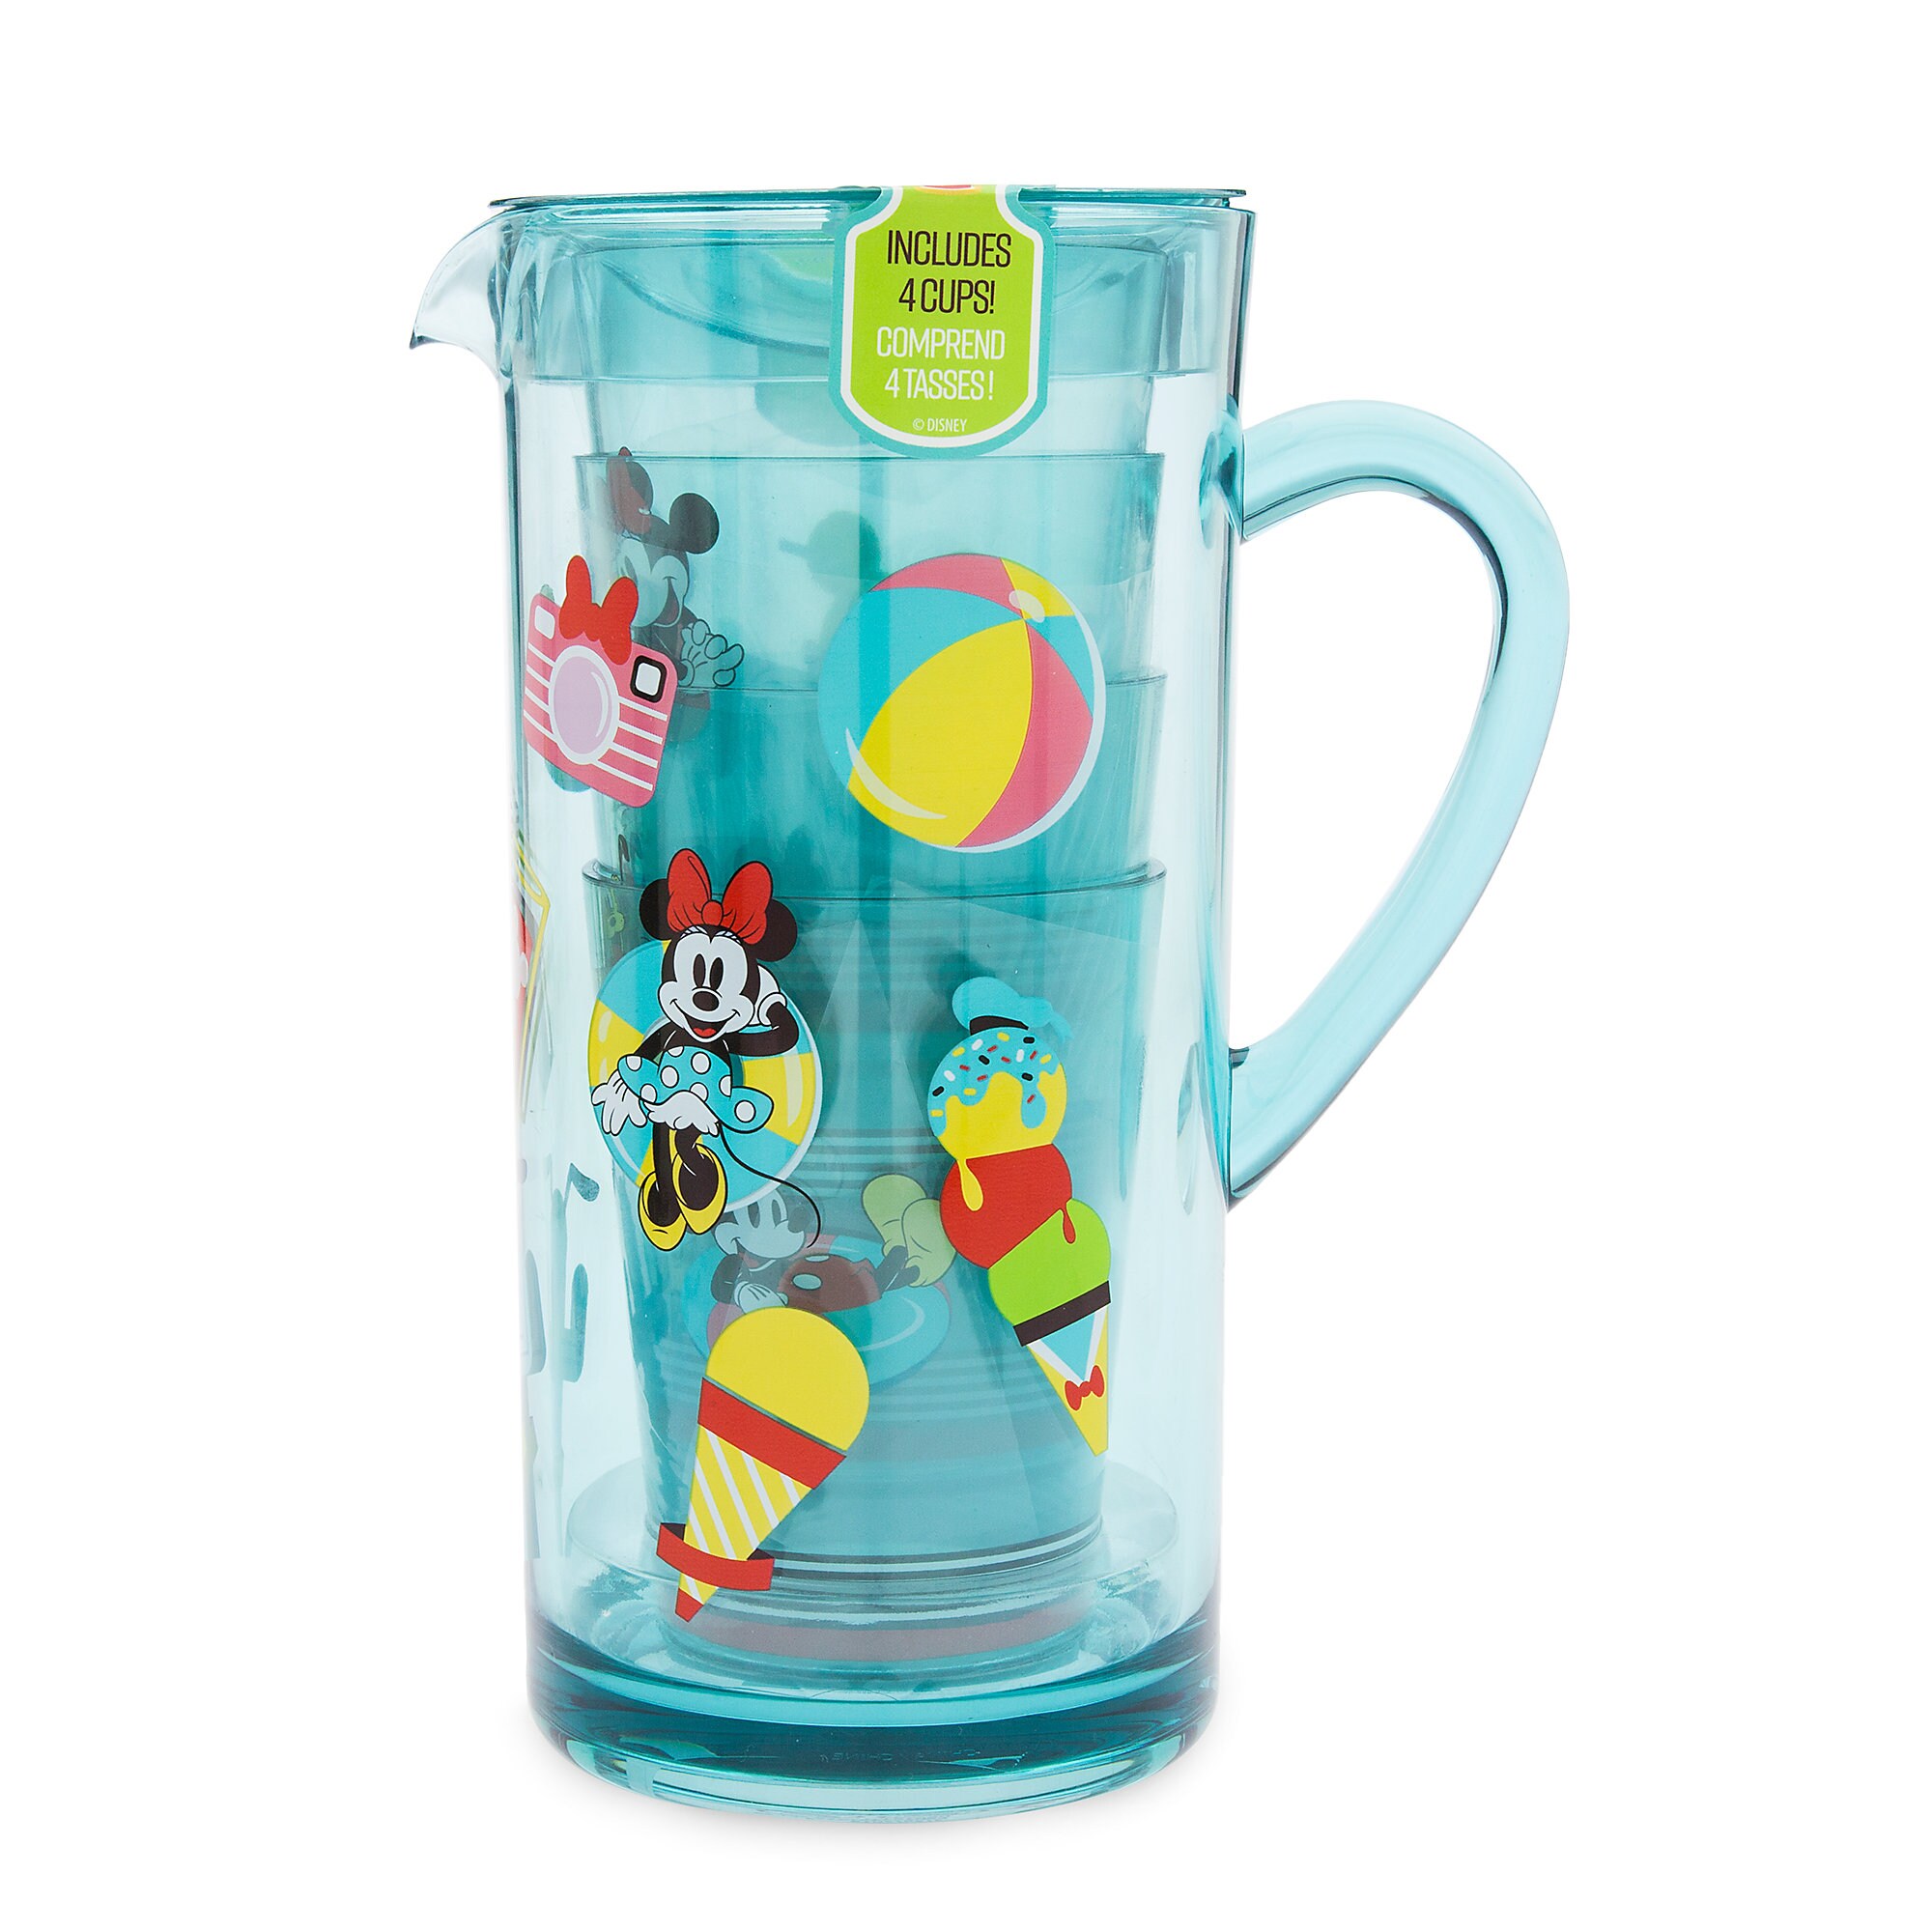 Mickey Mouse and Friends Pitcher Set - Disney Eats